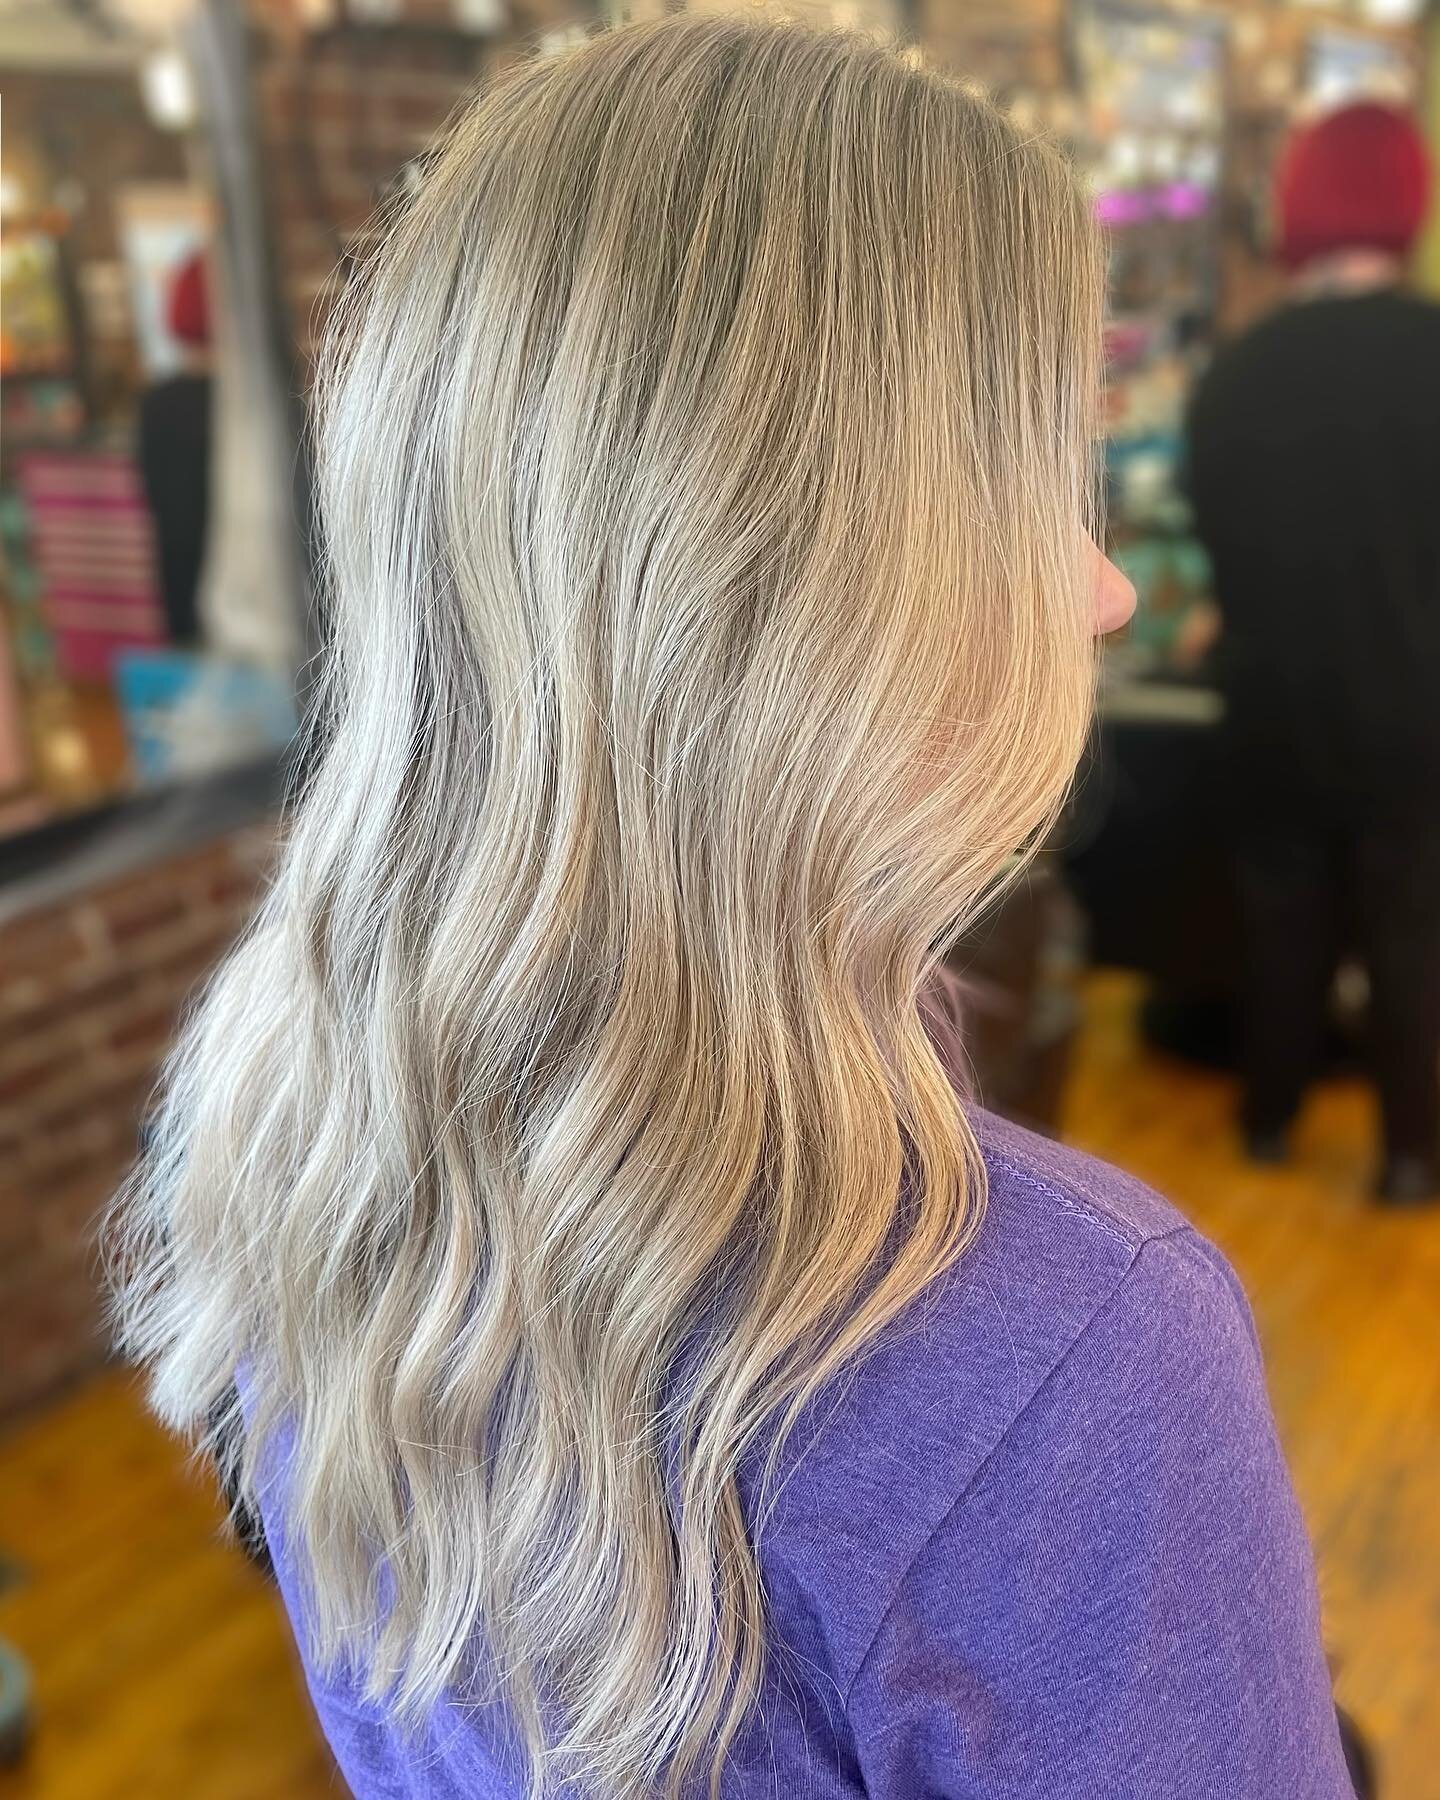 7 months if regrowth? No problem. Blonde Bliss is the appt to be as blonde as possible. 

#lexingtonhair #lexingtonhairstylist #sharethelex #wella #wellahair #evobottleblonde #blonde #blondehair #lexingtonblonde